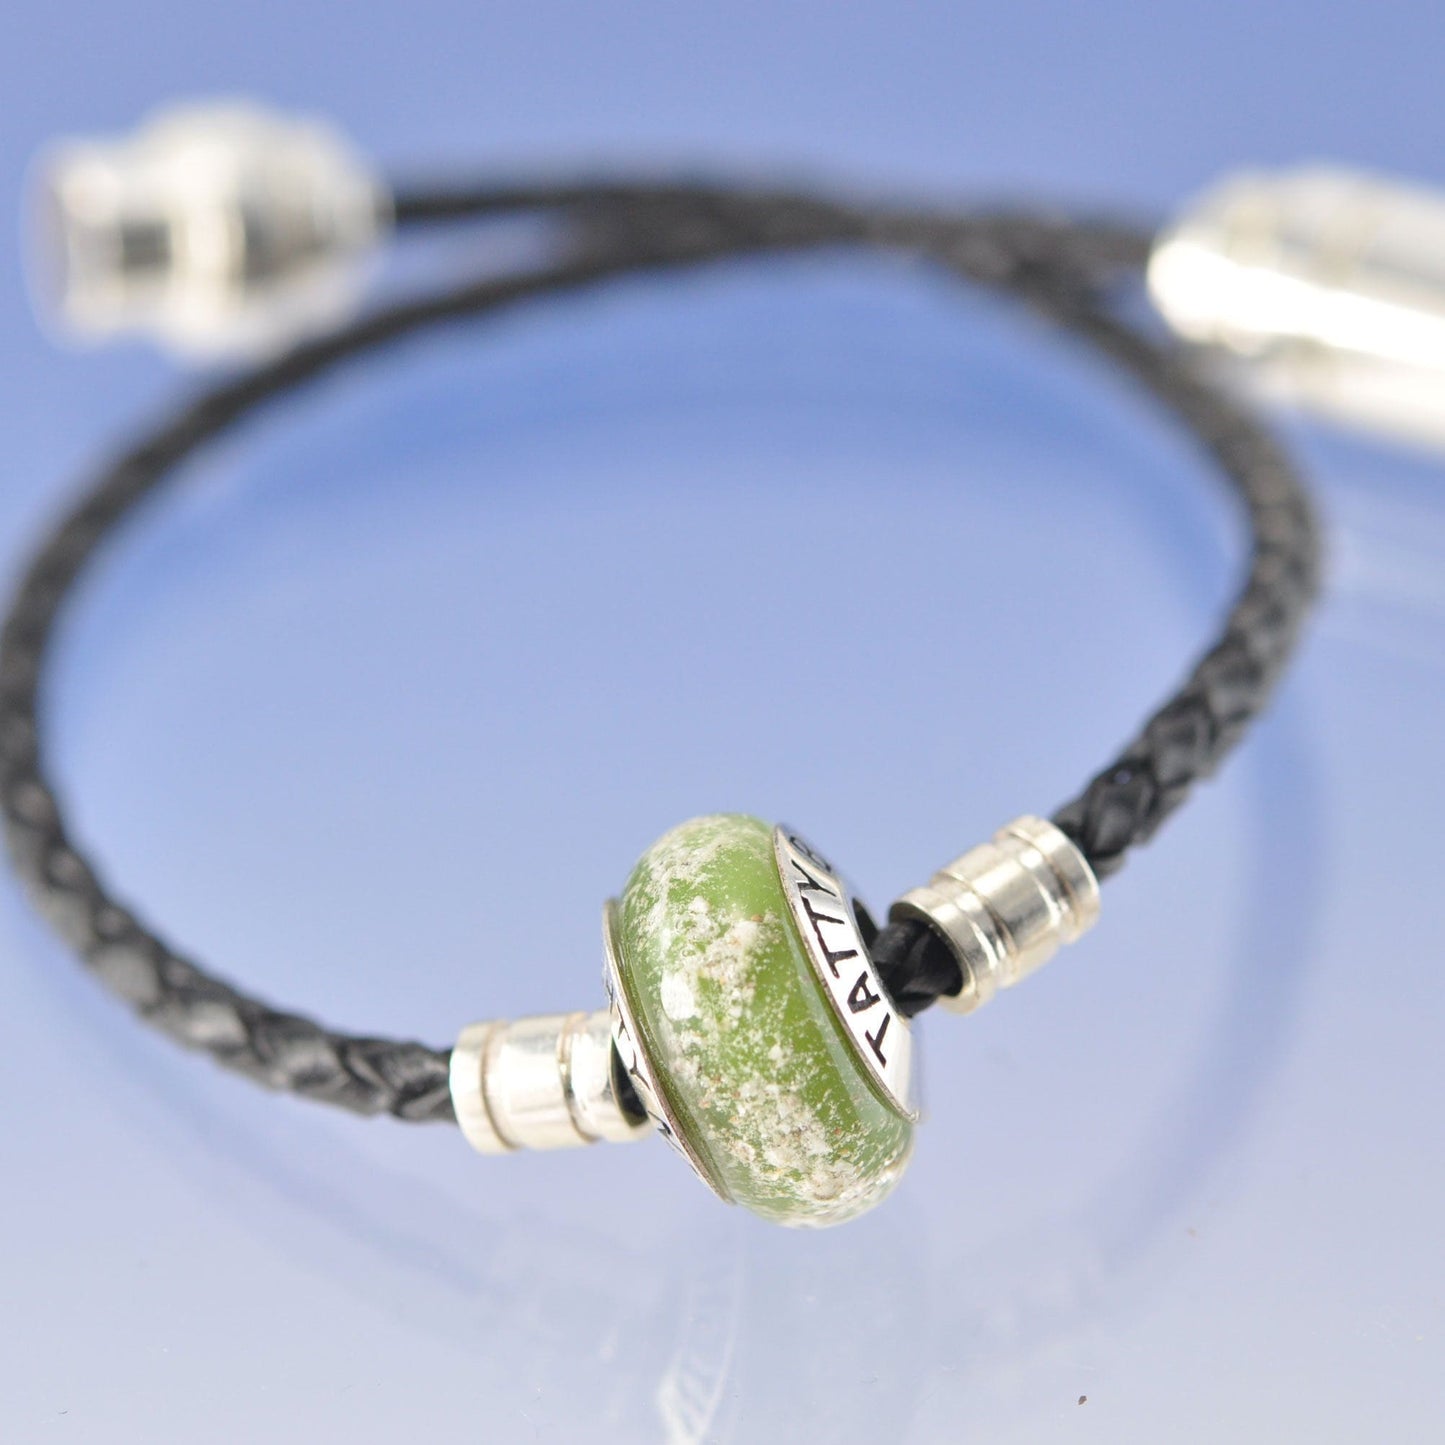 Cremation Ashes Into Glass Bead ON leather bracelet. Bead by Chris Parry Jewellery